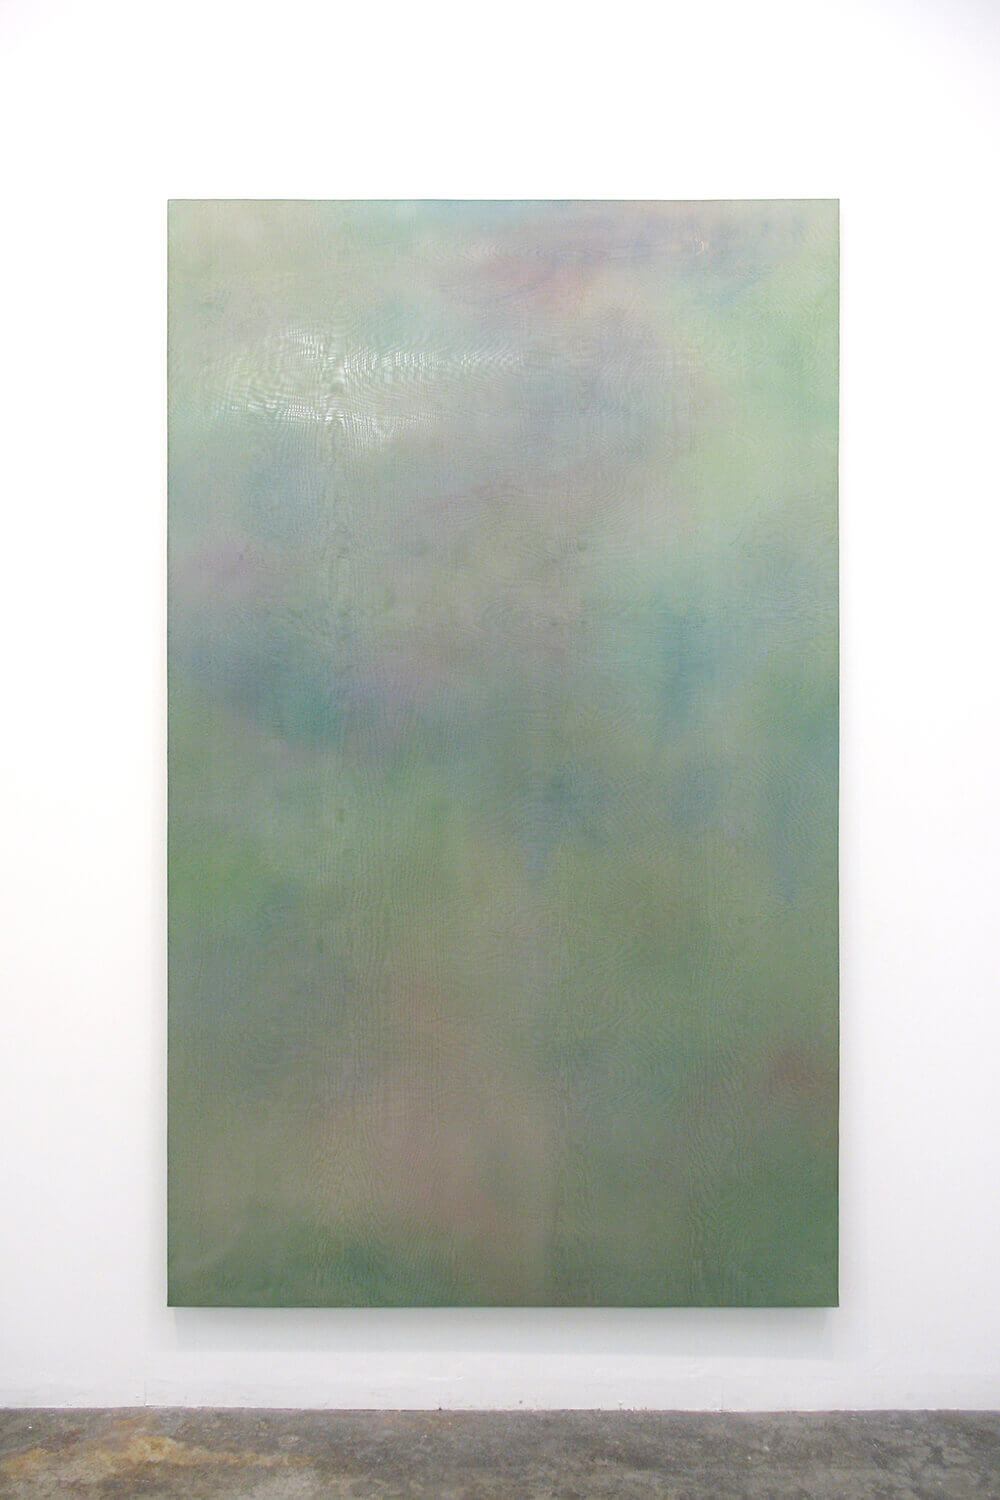 Untitled<br>
Acrylic, glass organdy, stainless steel, panel 200 x 12 cm 2012<br>
VOCA出展作<br>Price inquiry